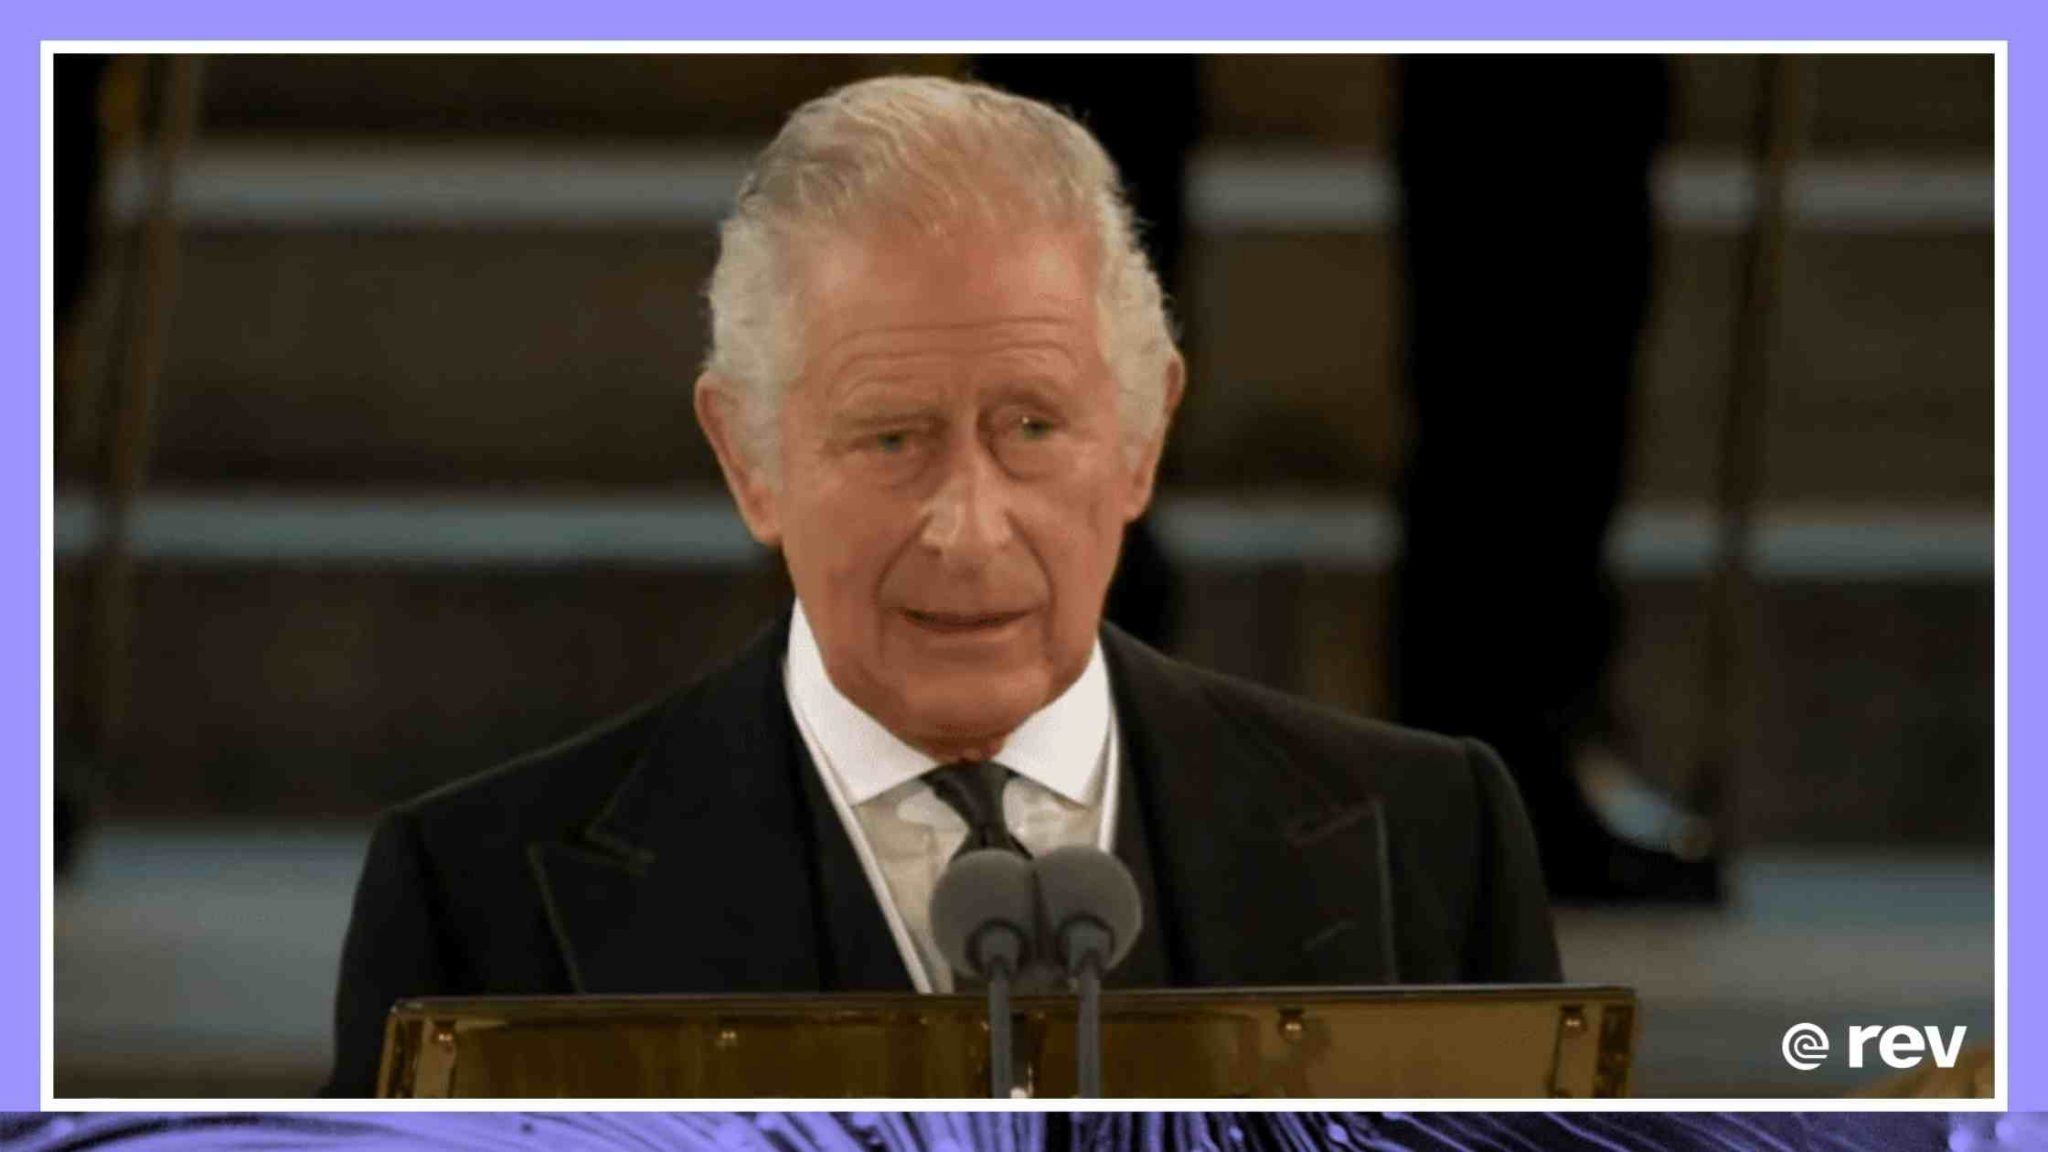 King Charles III addresses UK Parliament for 1st time Transcript